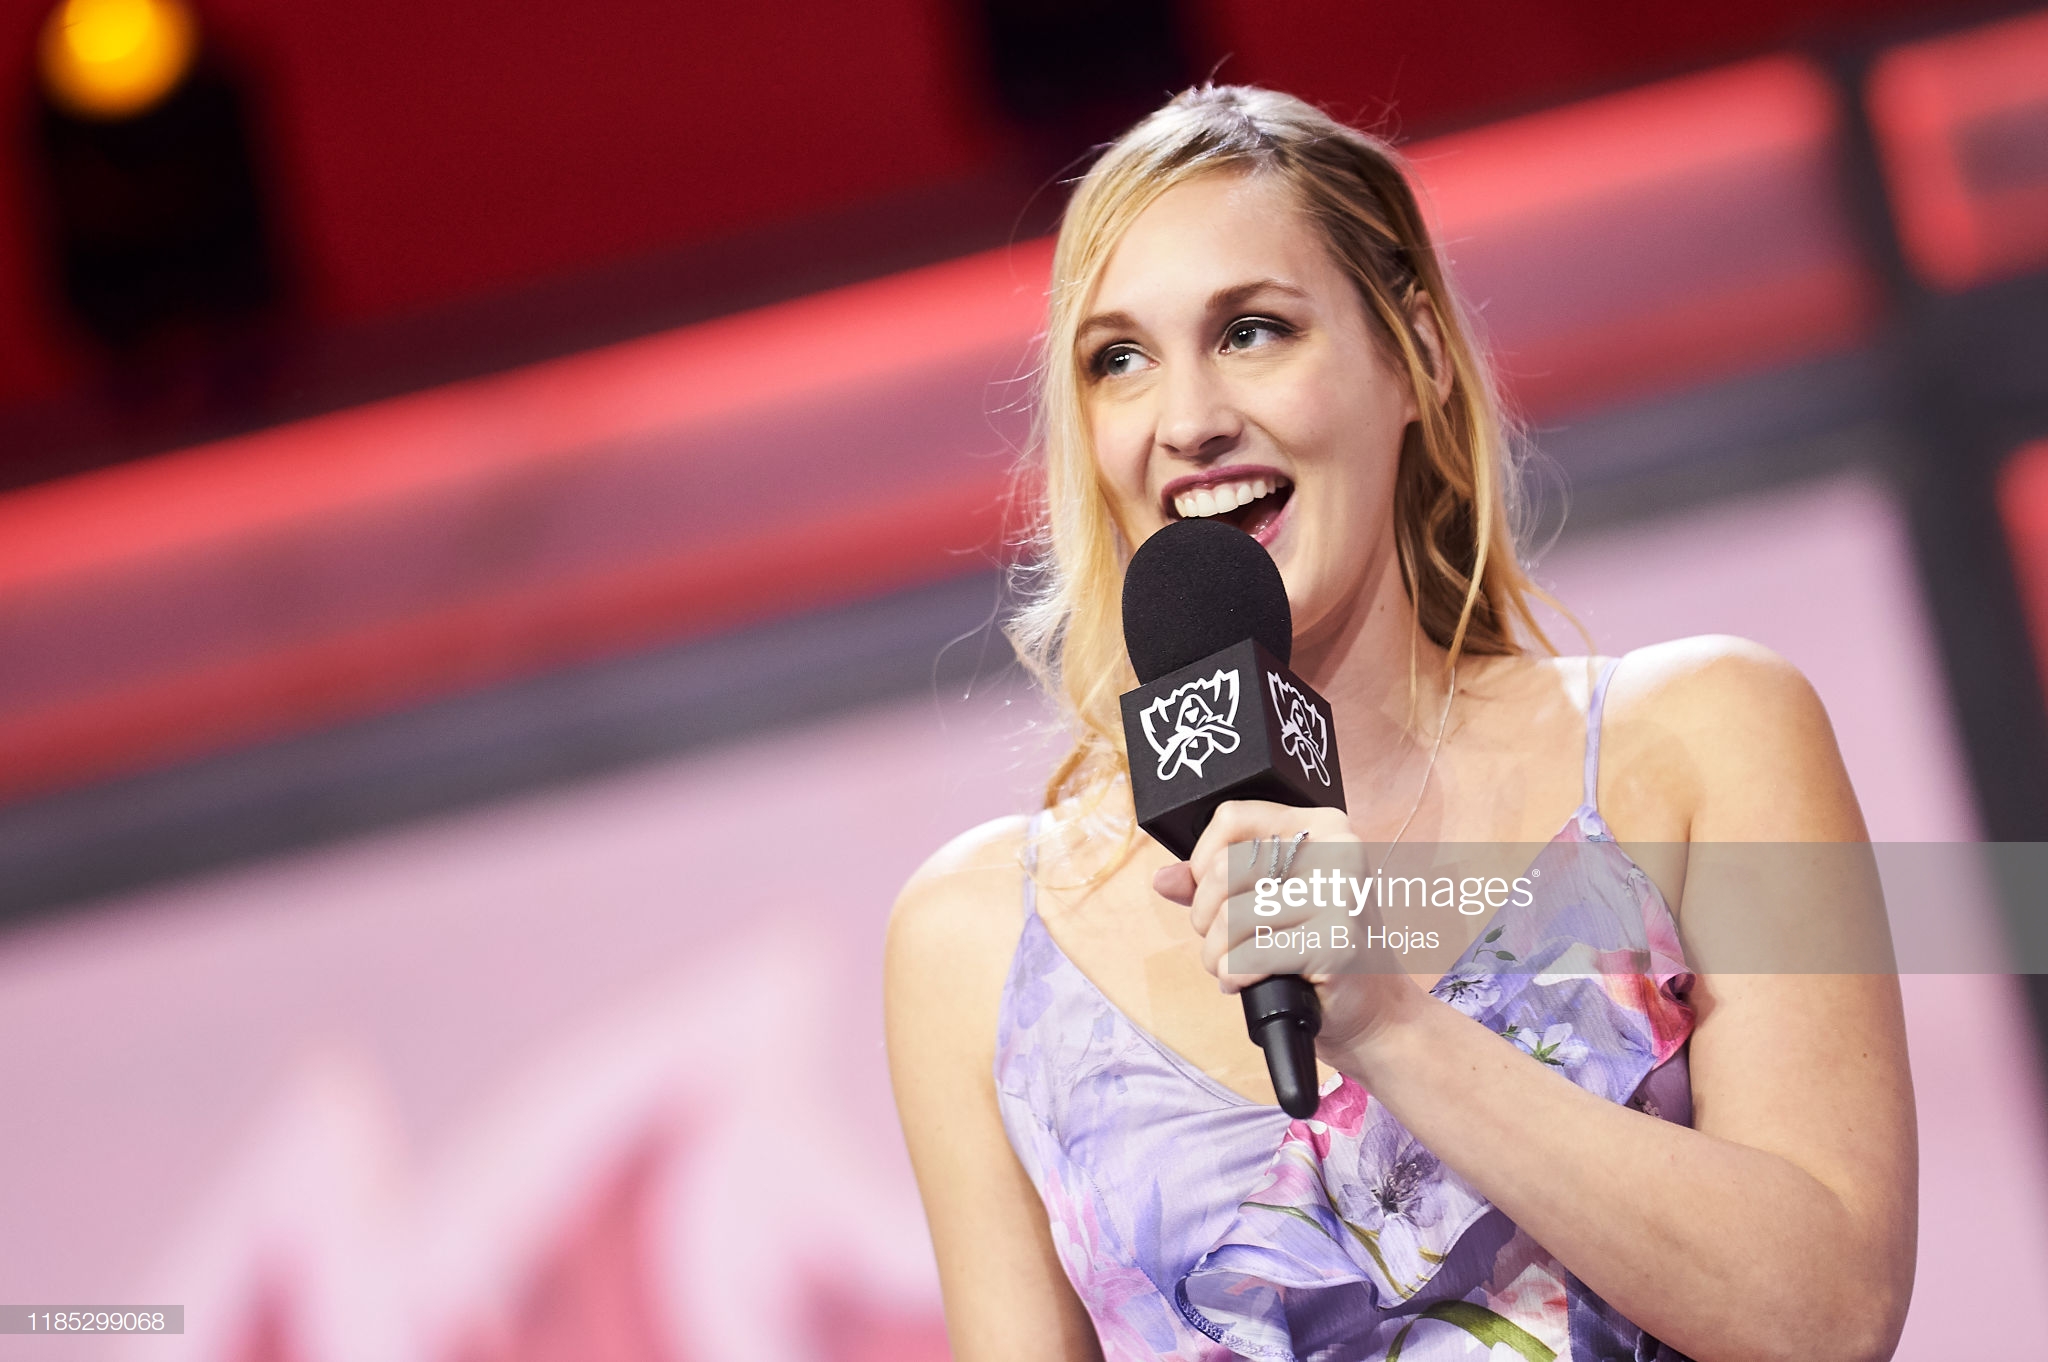 gettyimages-1185299068-2048x2048.jpg